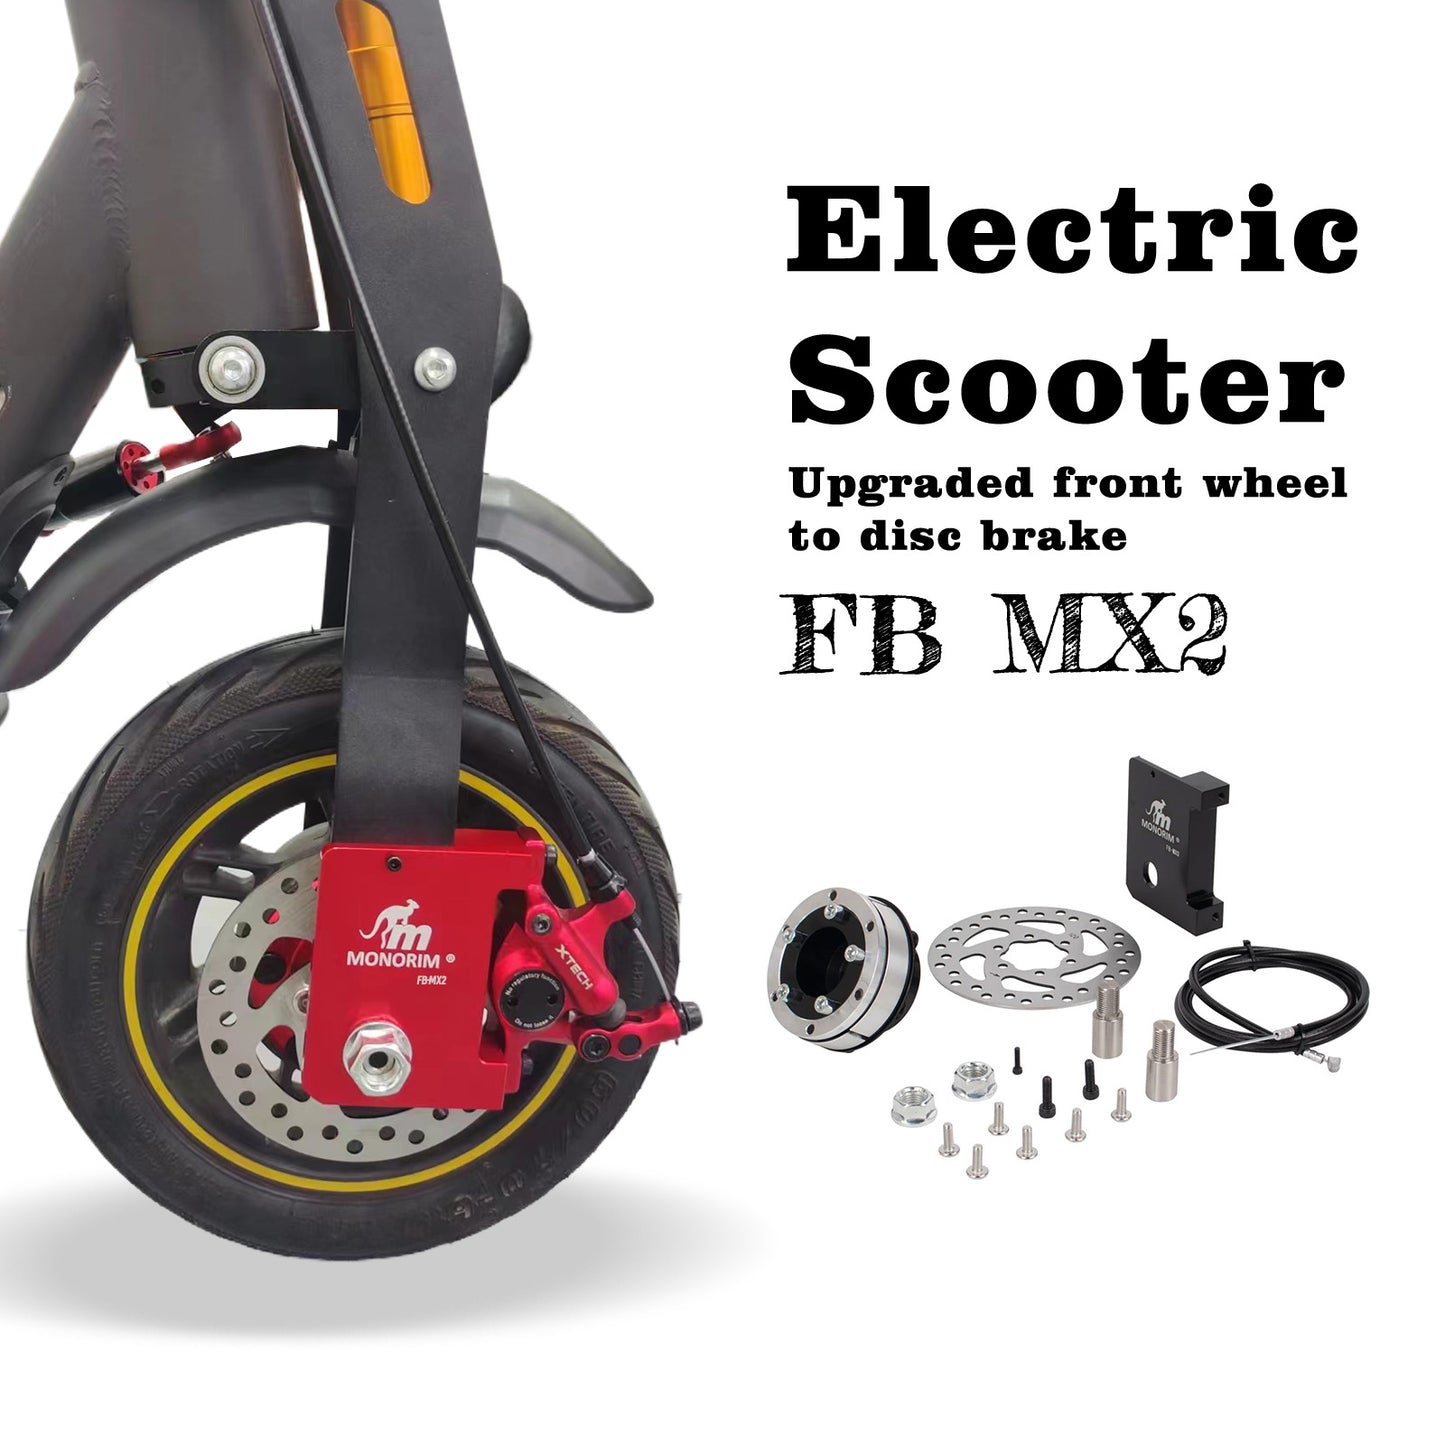 Monorim FB MX2 special for Segway MaxG2 series scooters upgrade to be Disc brake basic on hub wheel